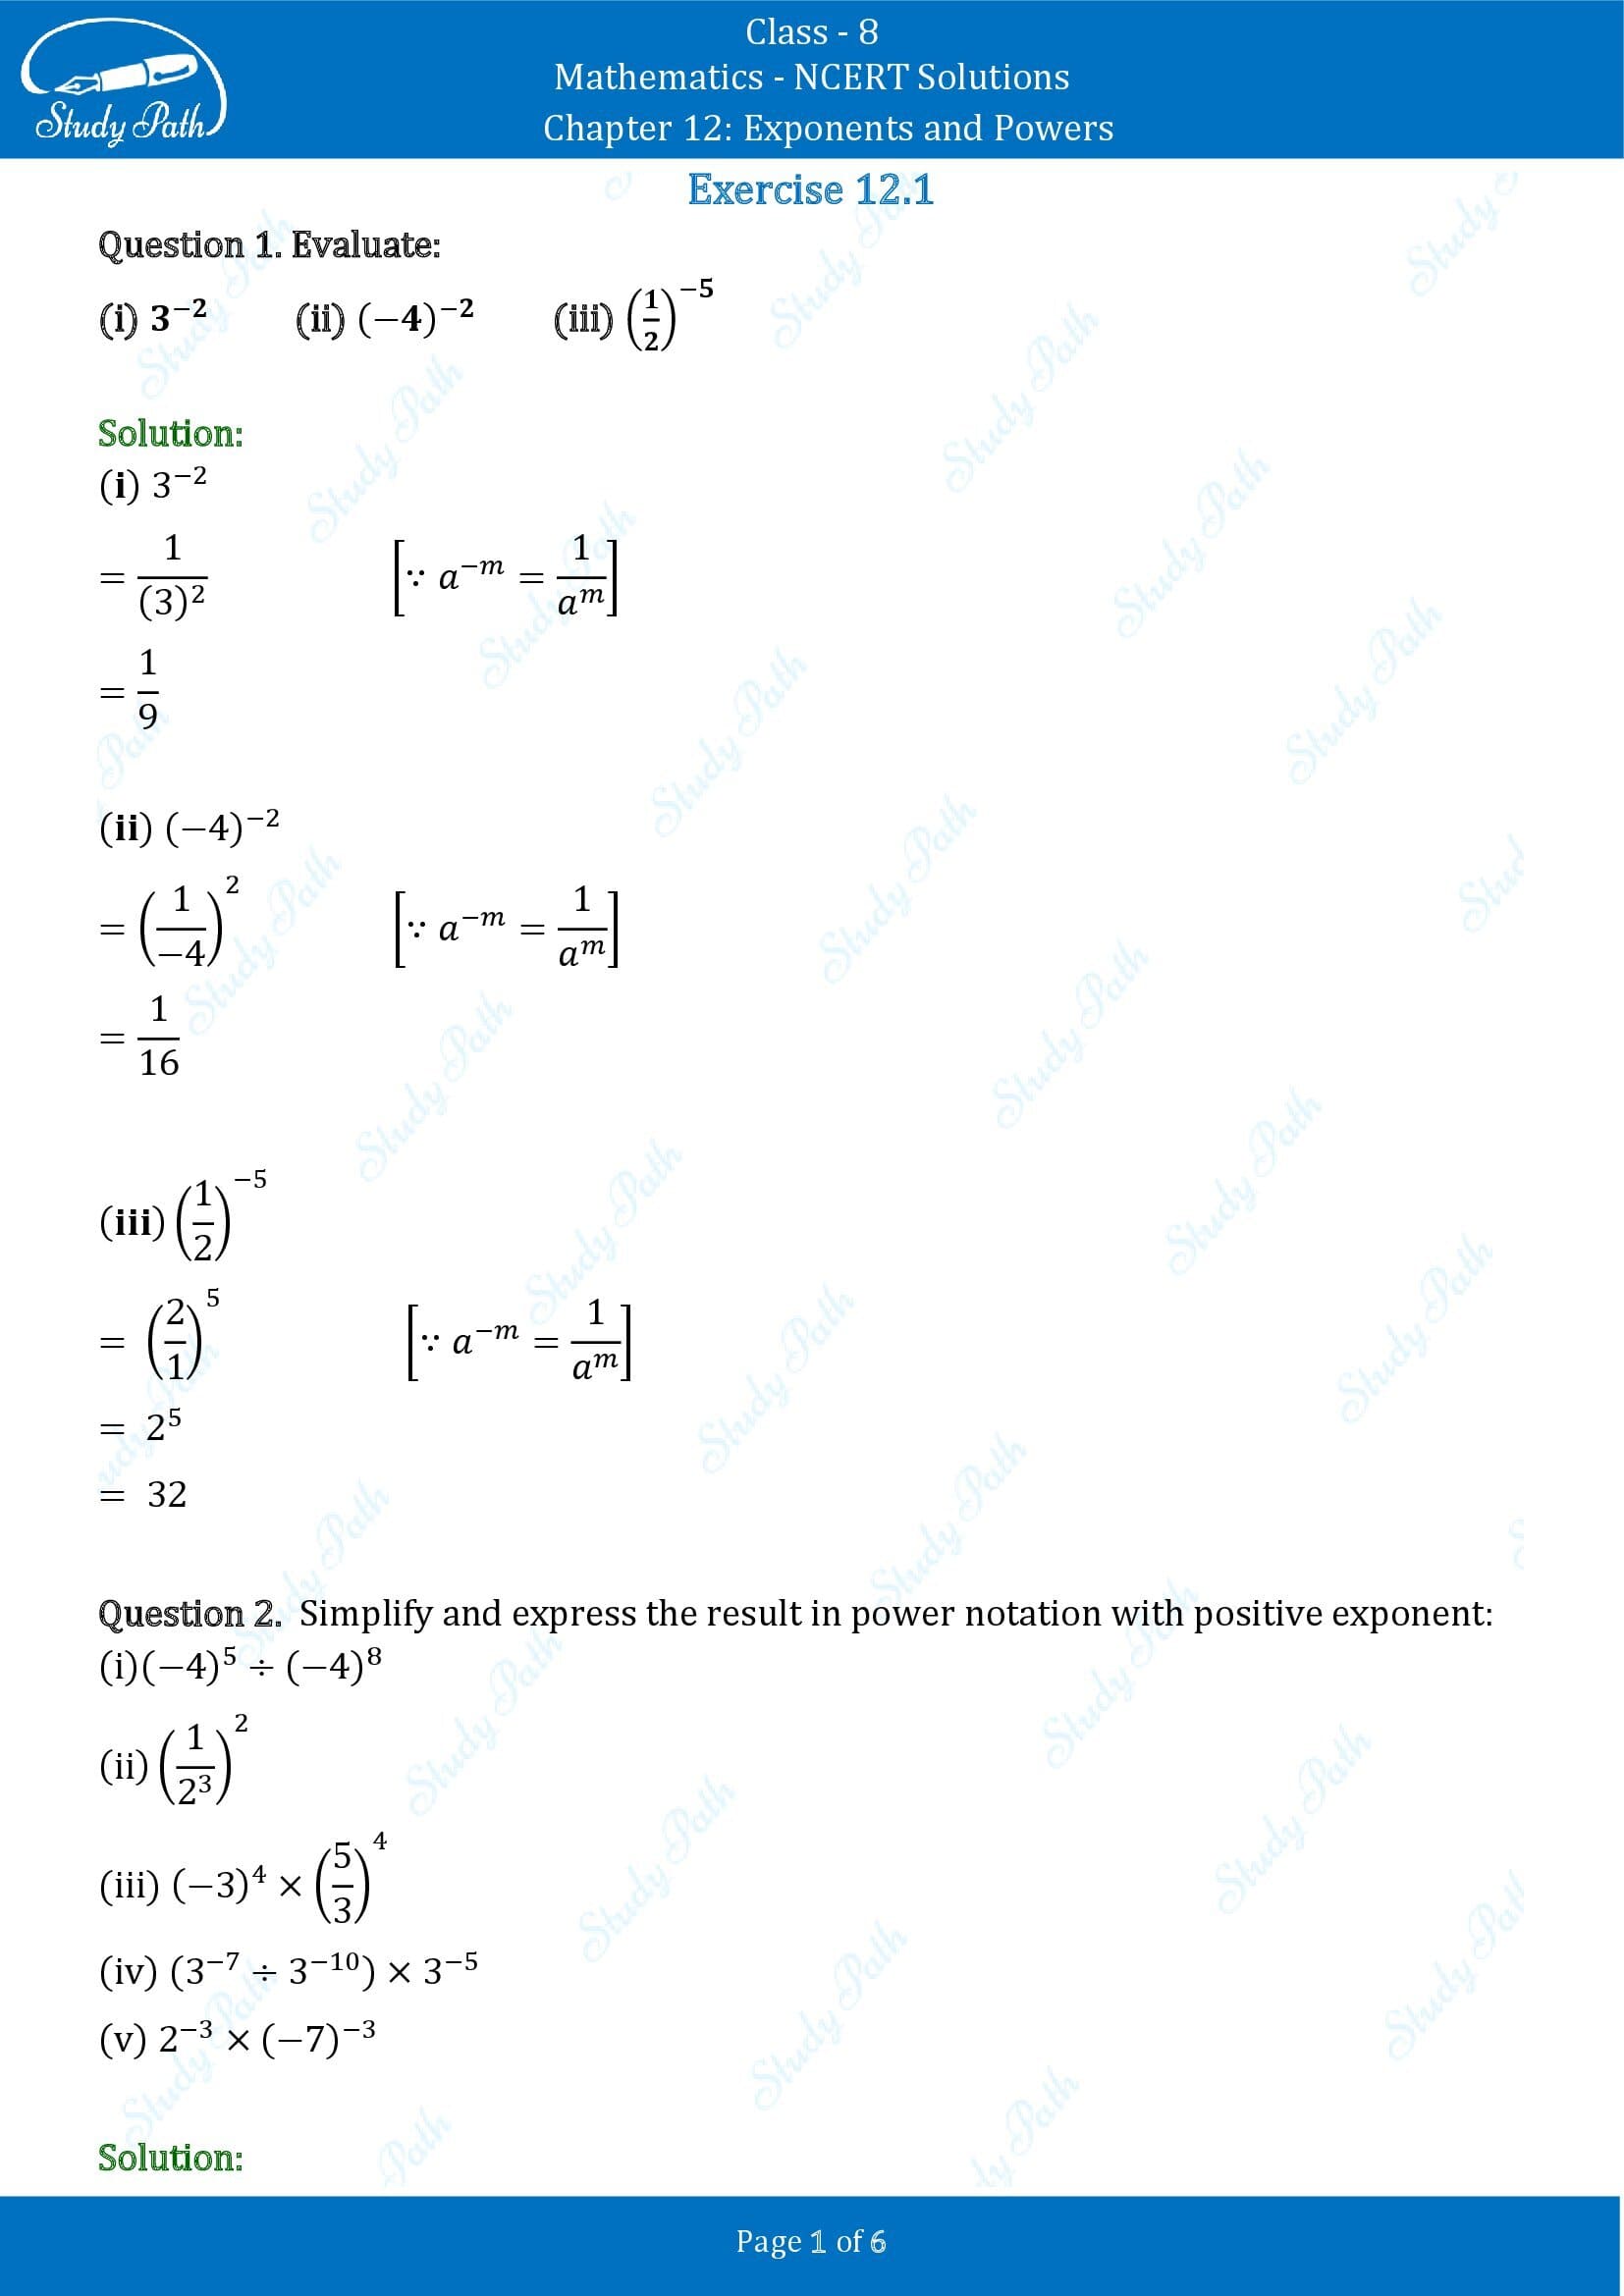 NCERT Solutions for Class 8 Maths Chapter 12 Exponents and Powers Exercise 12.1 00001